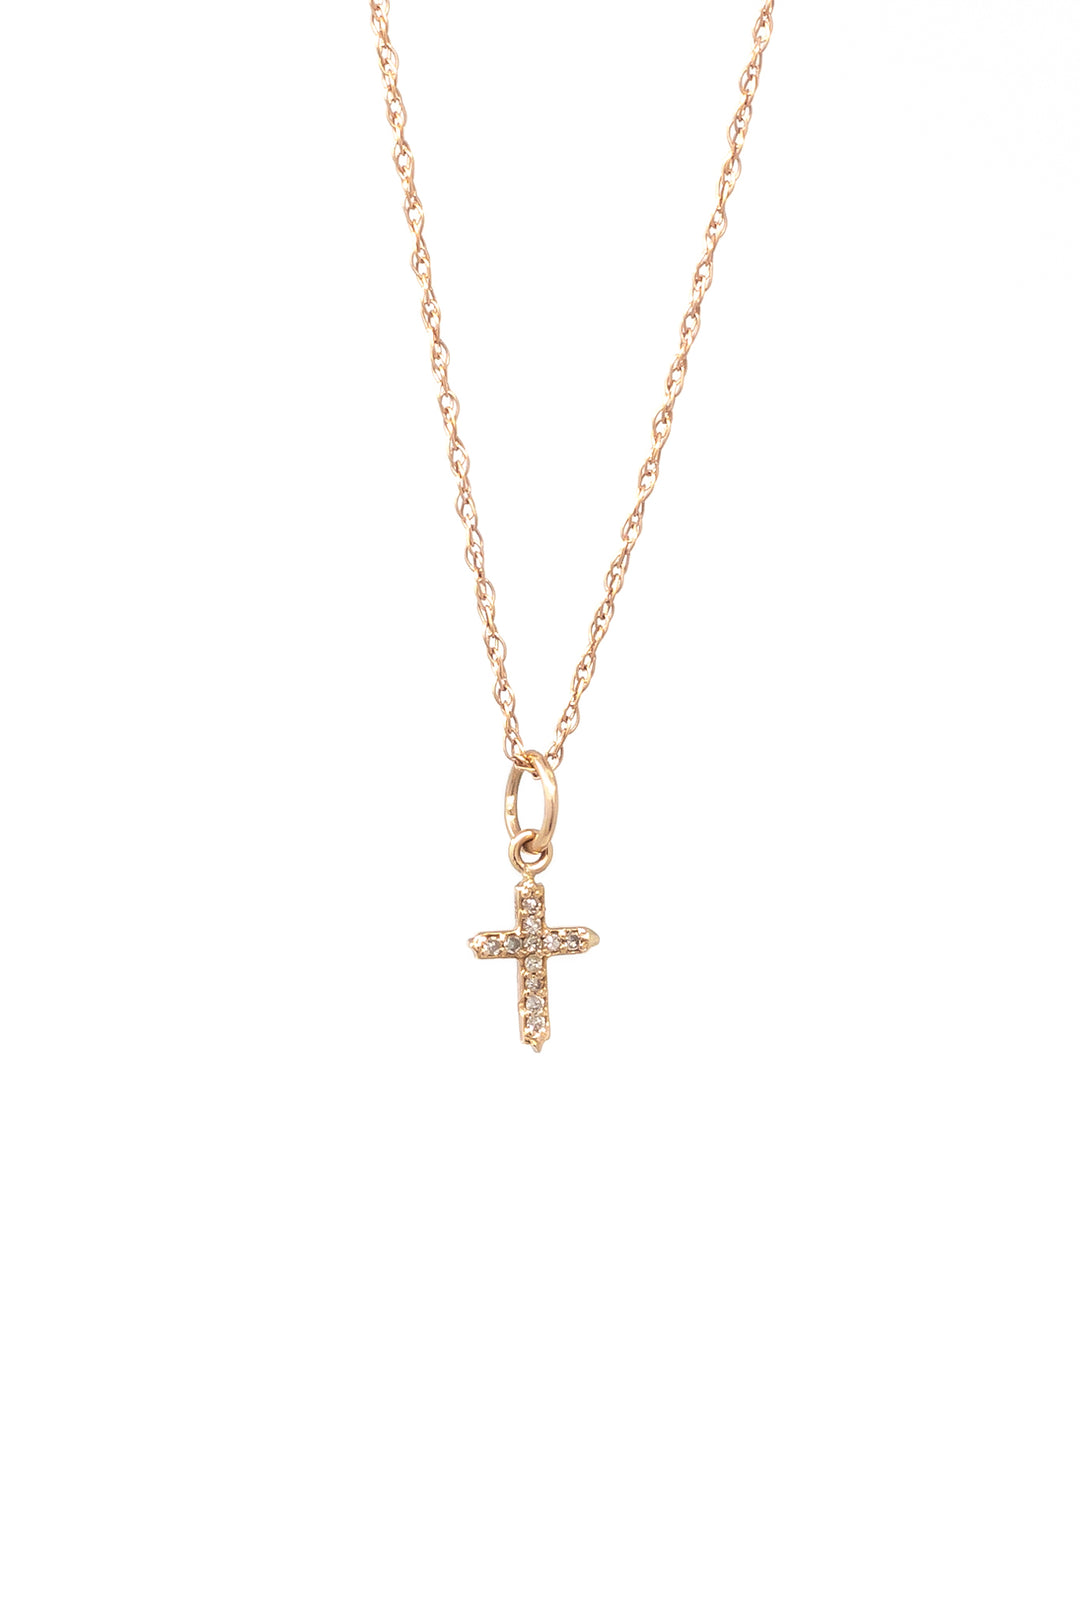 14K SM CROSS CHARM NECKLACE - Kingfisher Road - Online Boutique